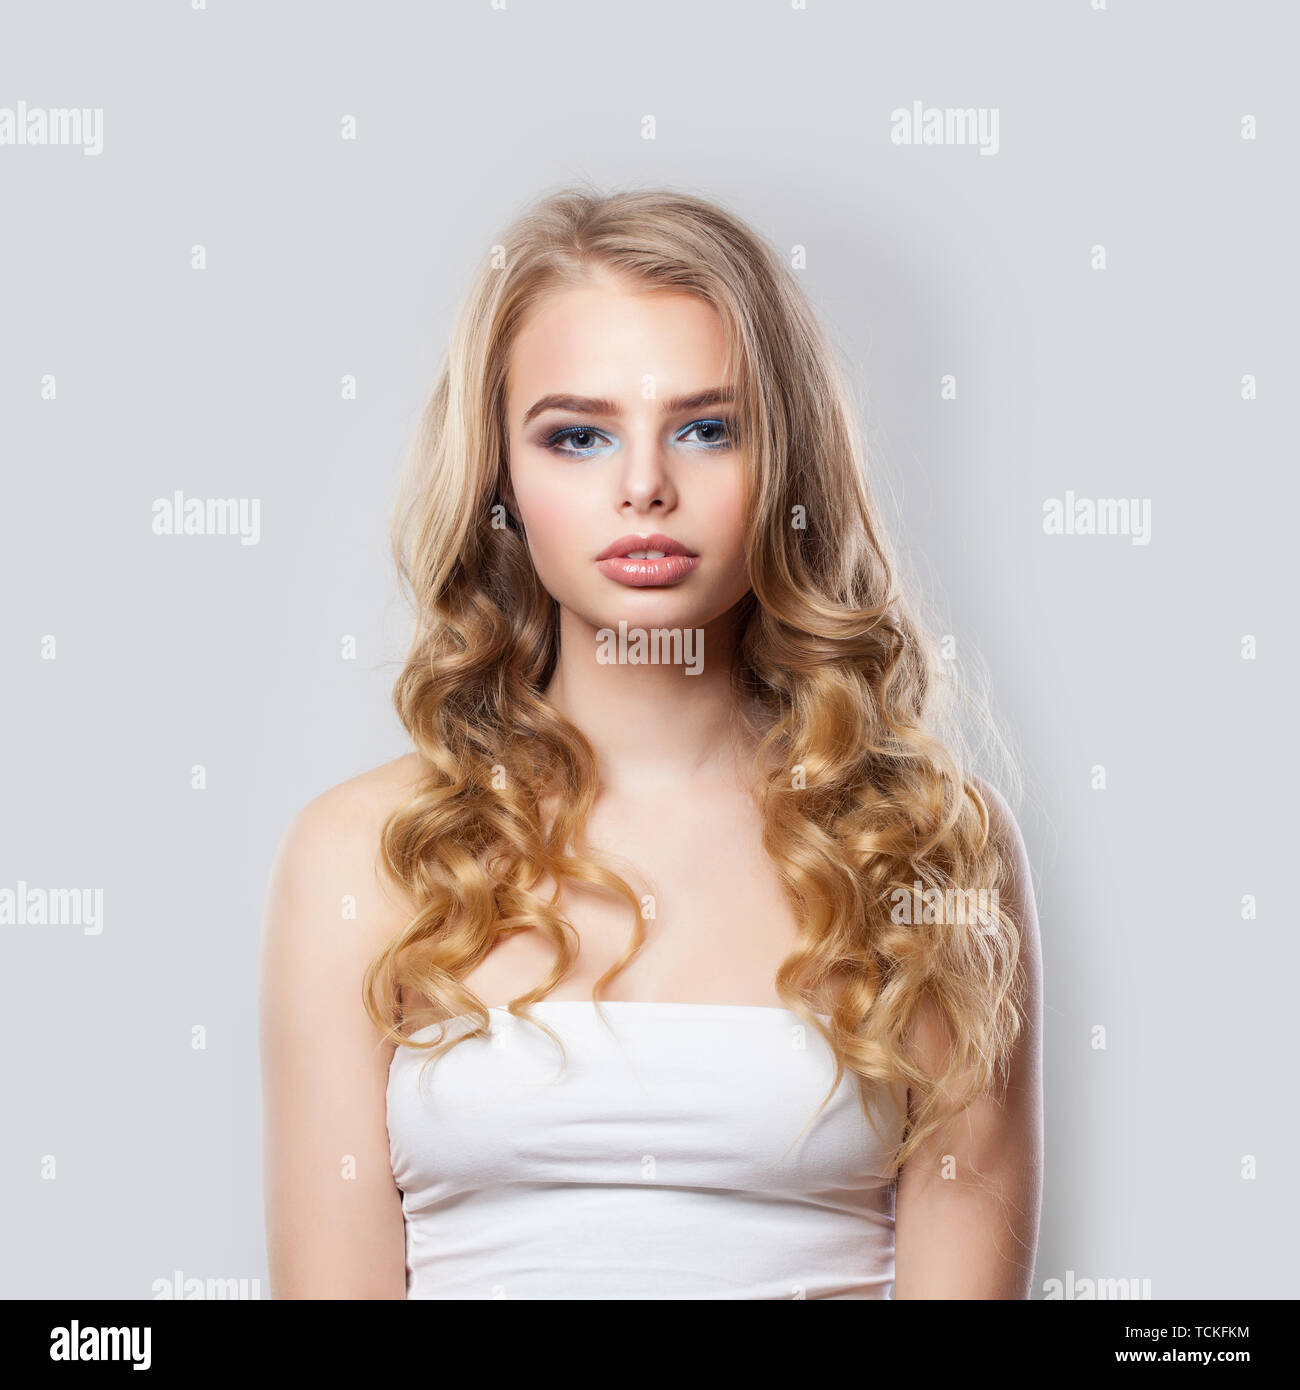 Pretty girl looking at camera, portrait Stock Photo